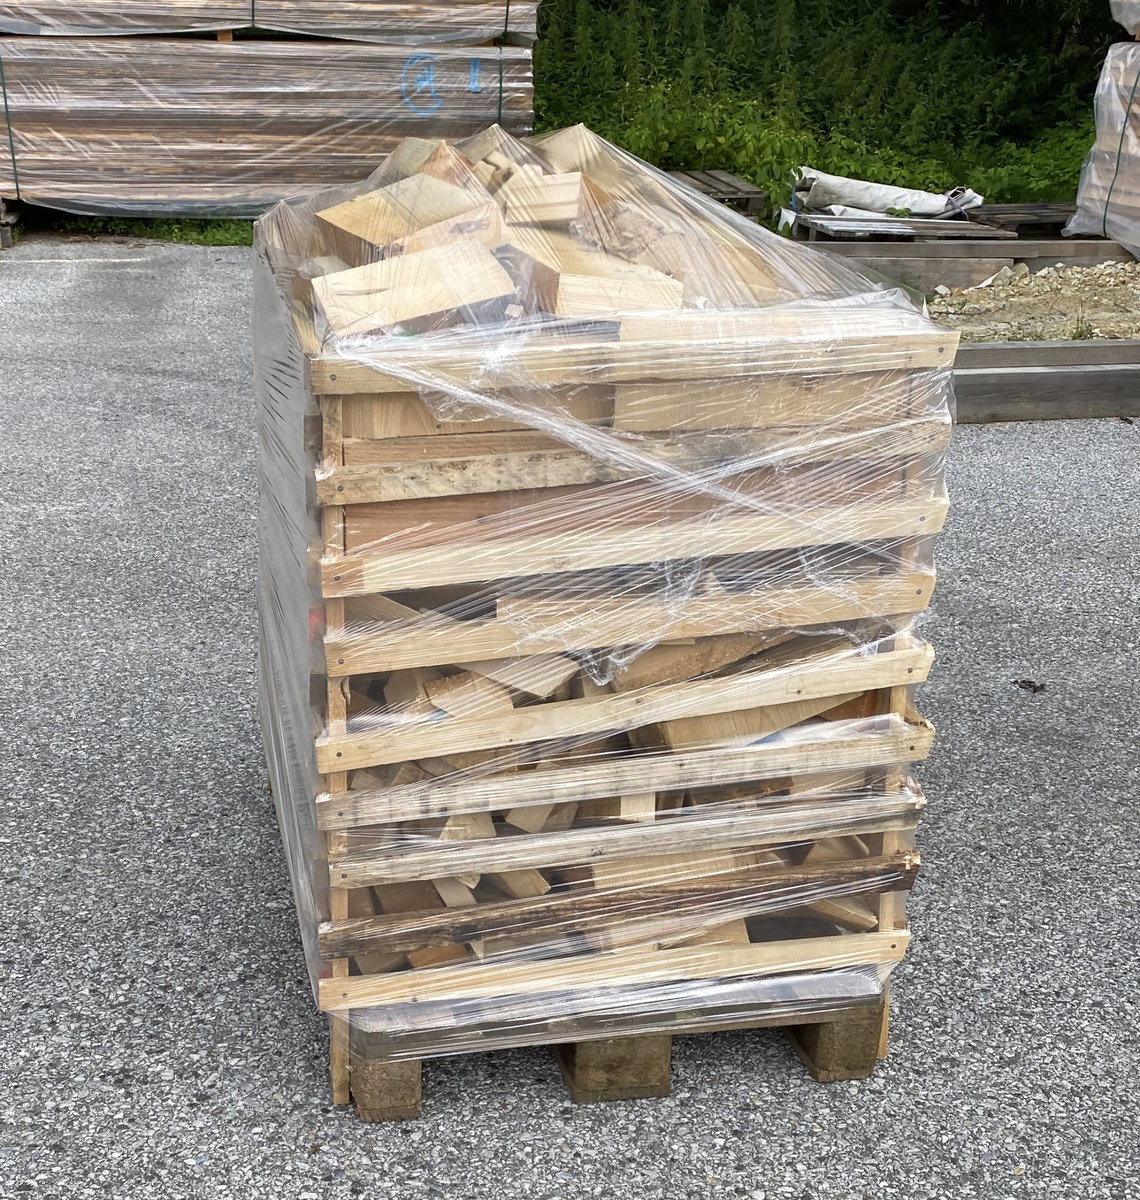 firewood from Riegler Timber Trading